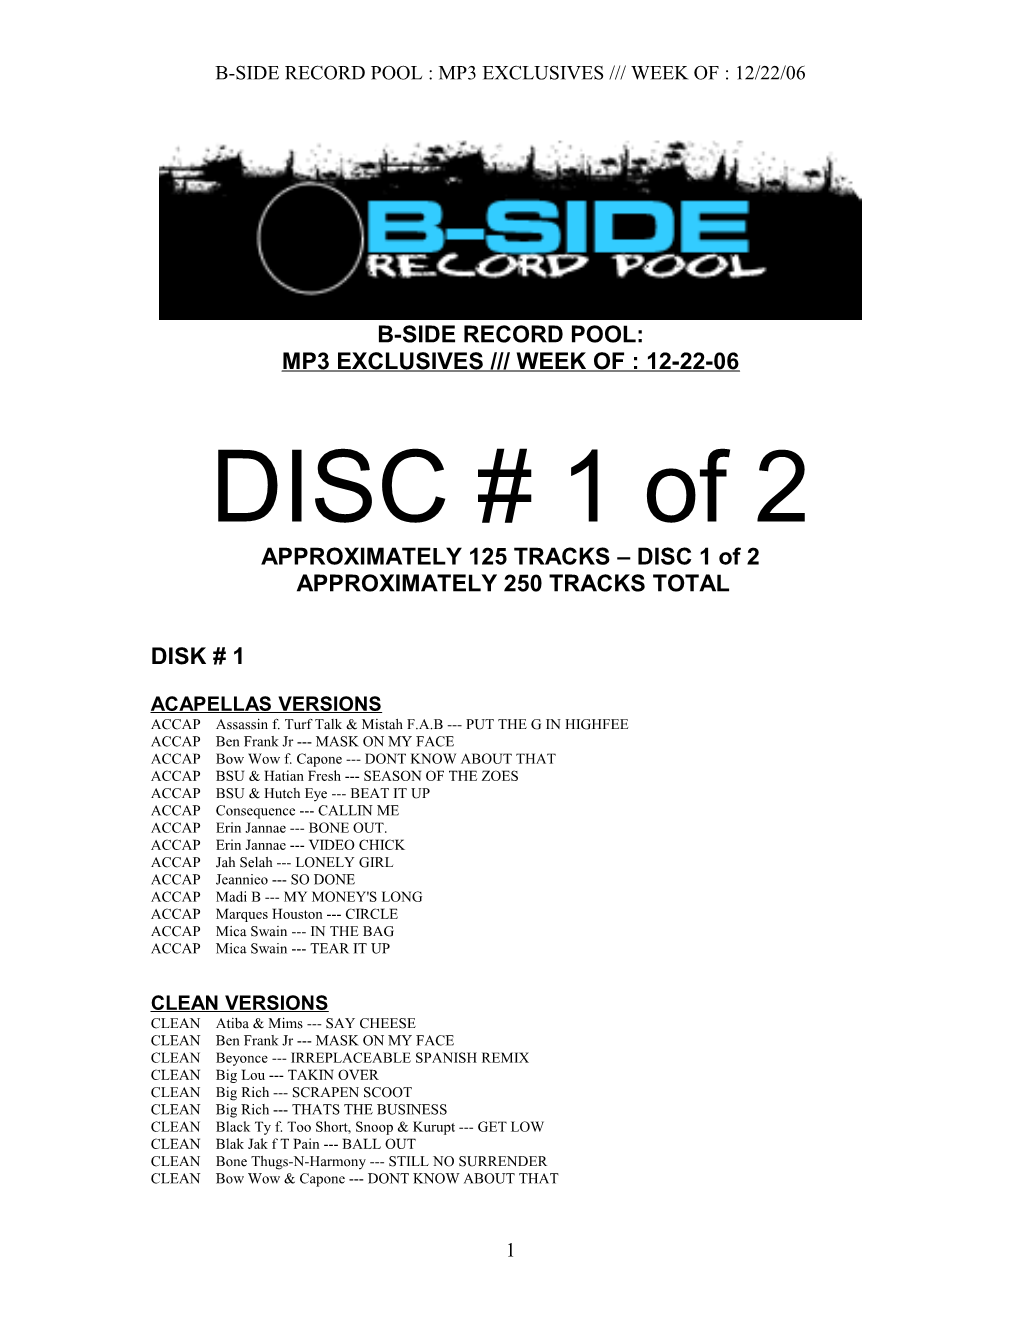 B-Side Record Pool : Mp3 Exclusives Week of : 12/22/06